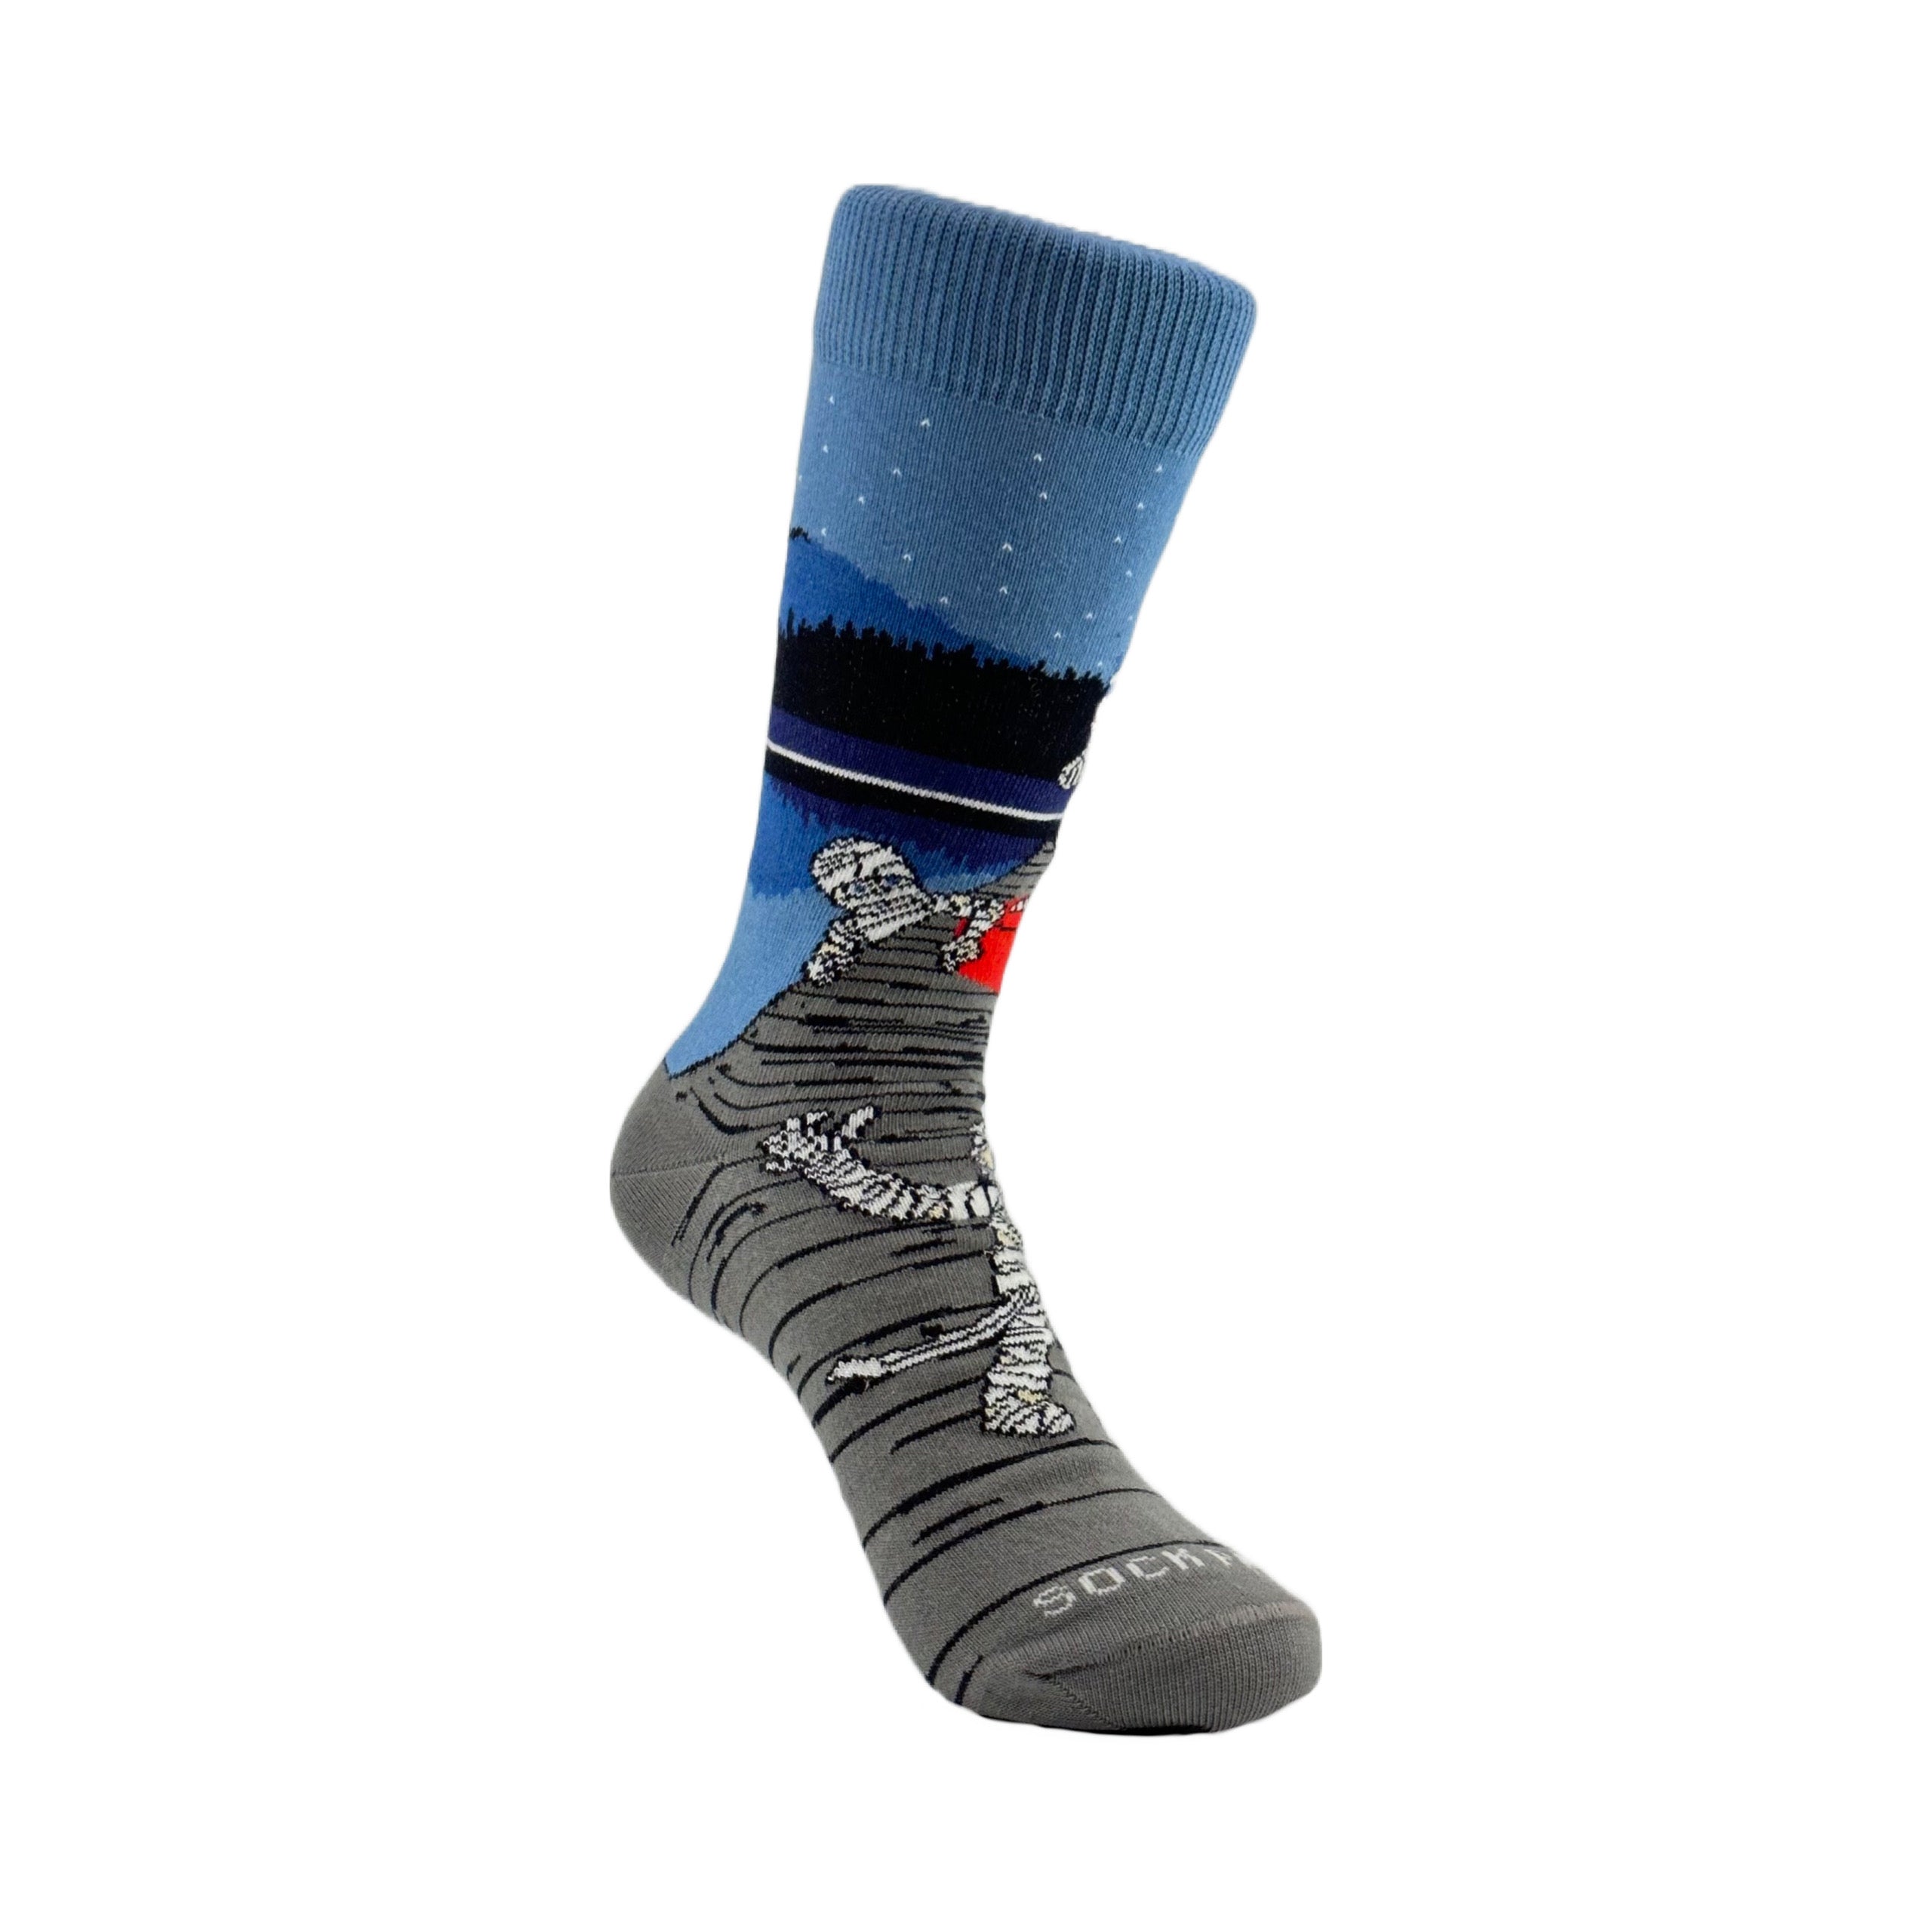 Mummy Night Out Socks from the Sock Panda (Adult Small)